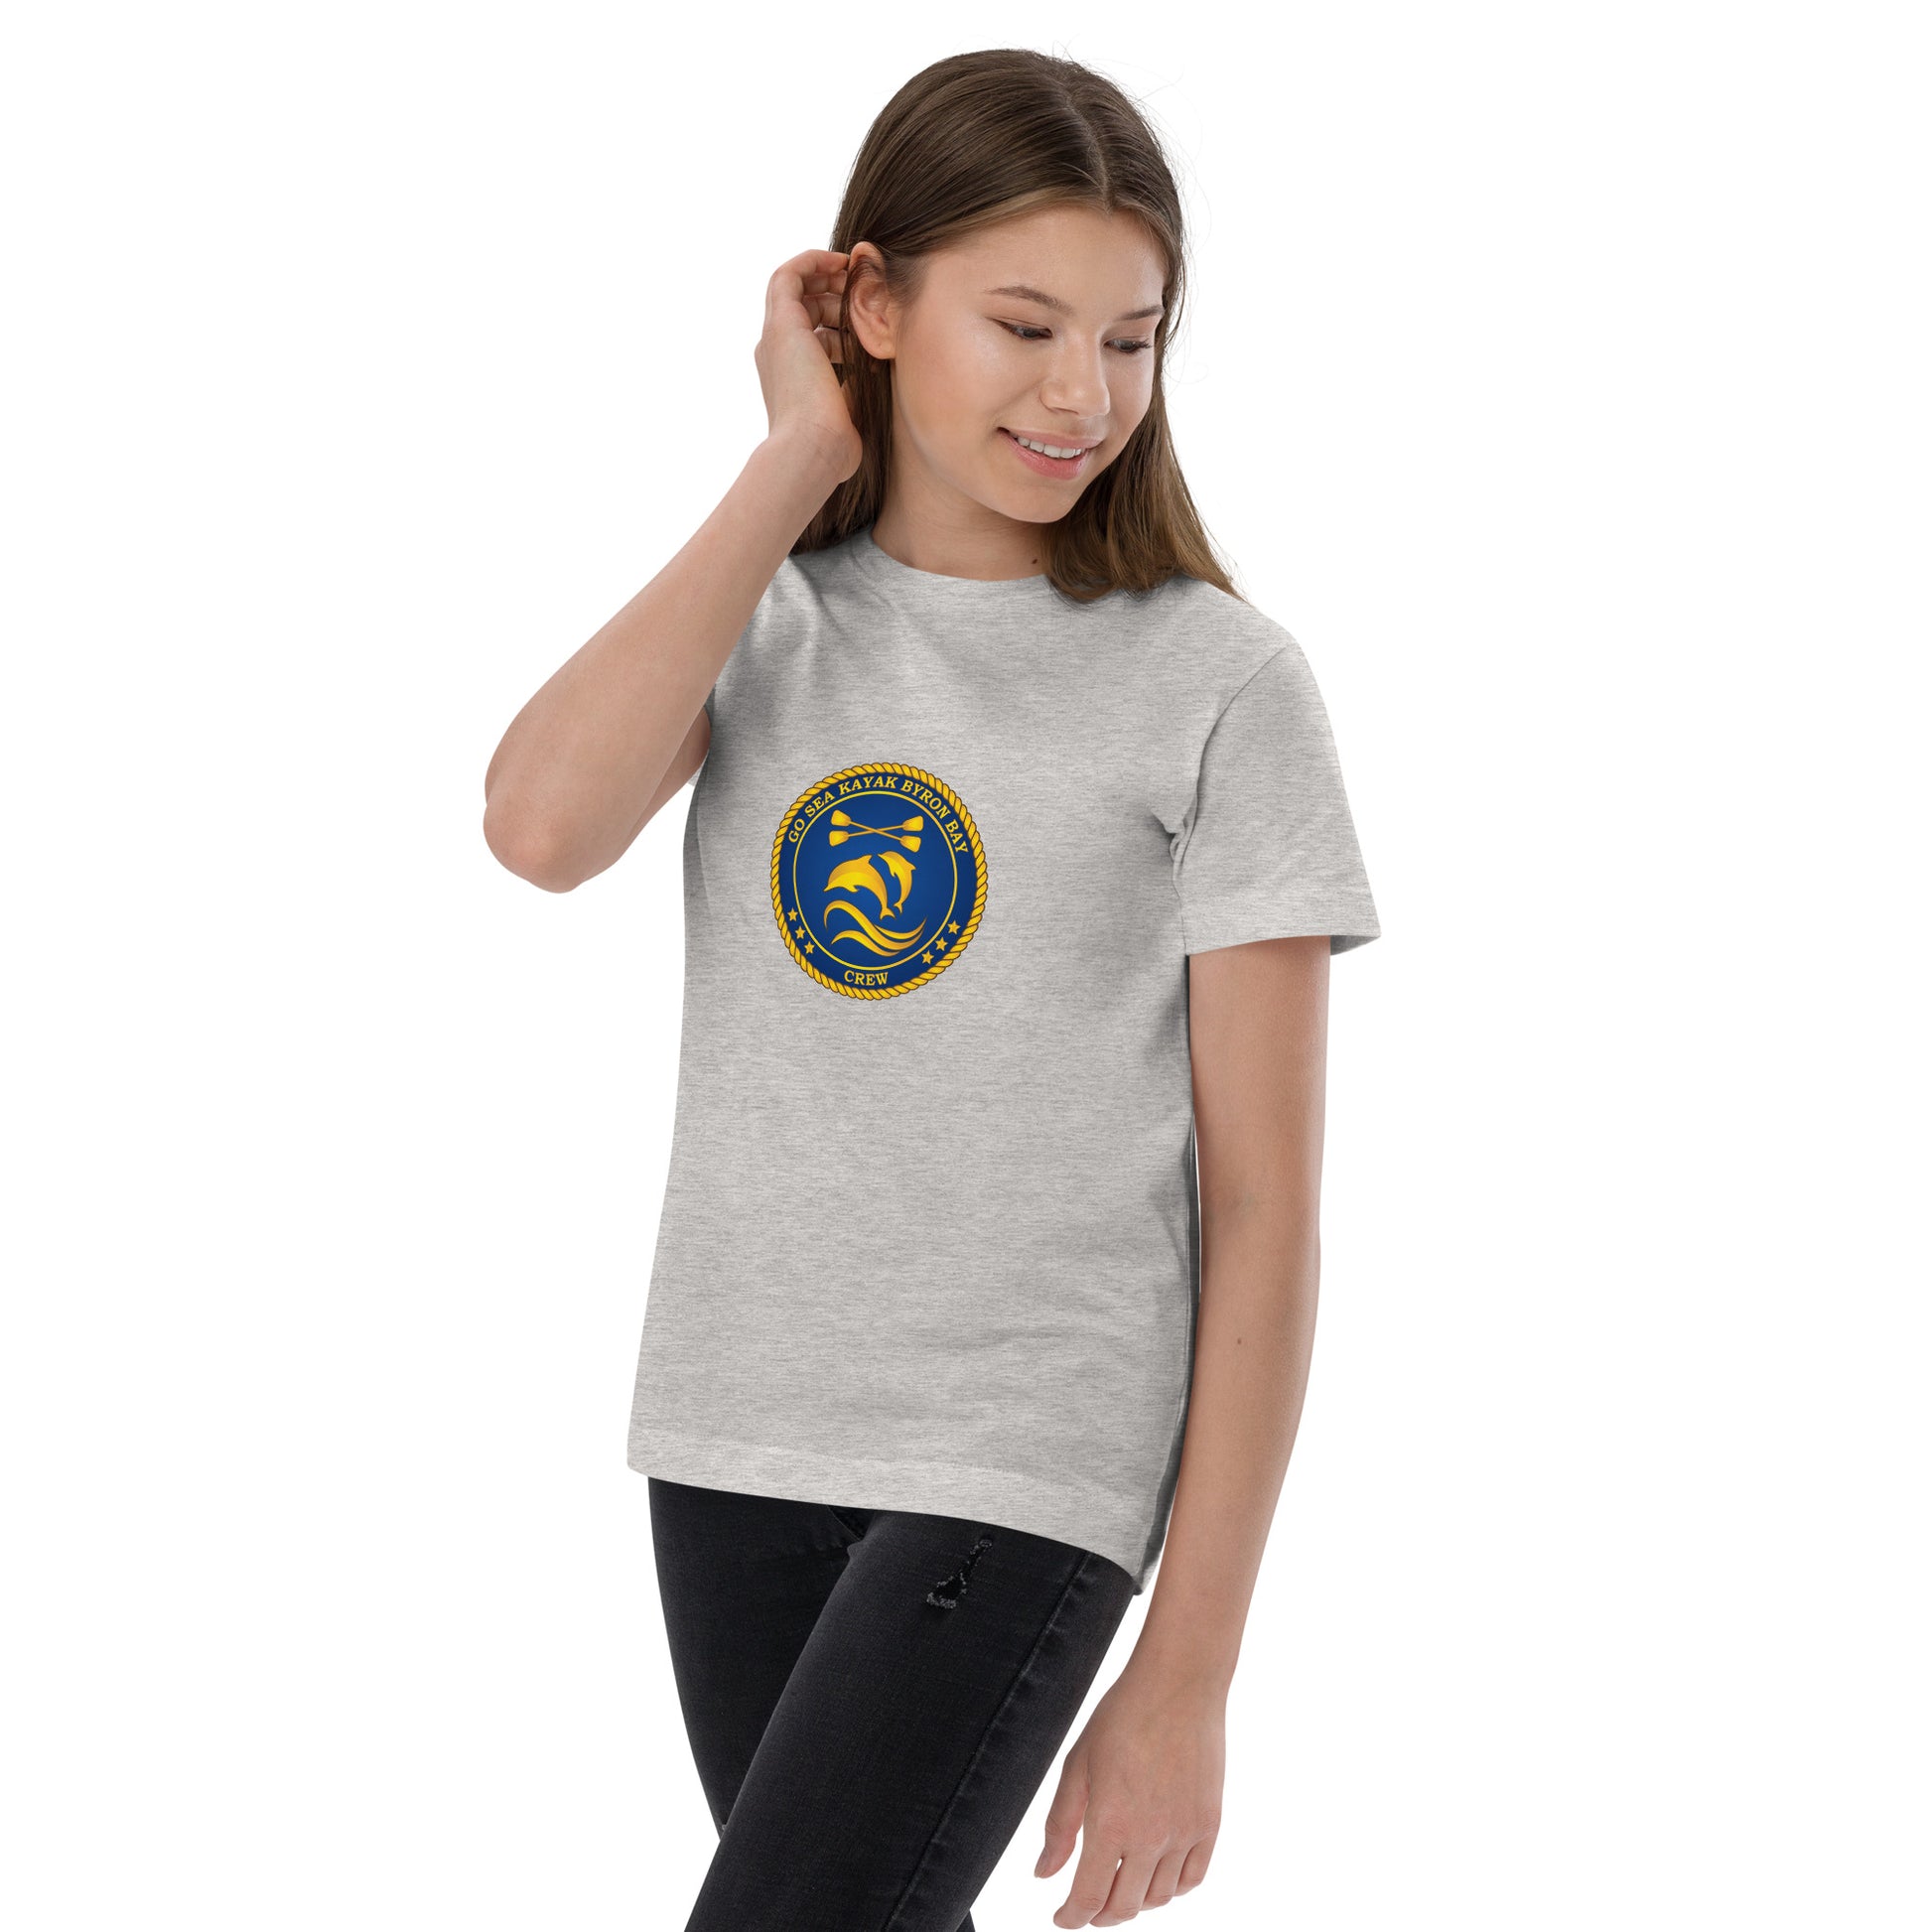  Kids T-Shirt - Natural / Heather colour - Being warn on girl standing one hand pushing hair behind ear - Go Sea Kayak Byron Bay Crew (issue 2018-2019) logo on front - Genuine Byron Bay Merchandise | Produced by Go Sea Kayak Byron Bay 